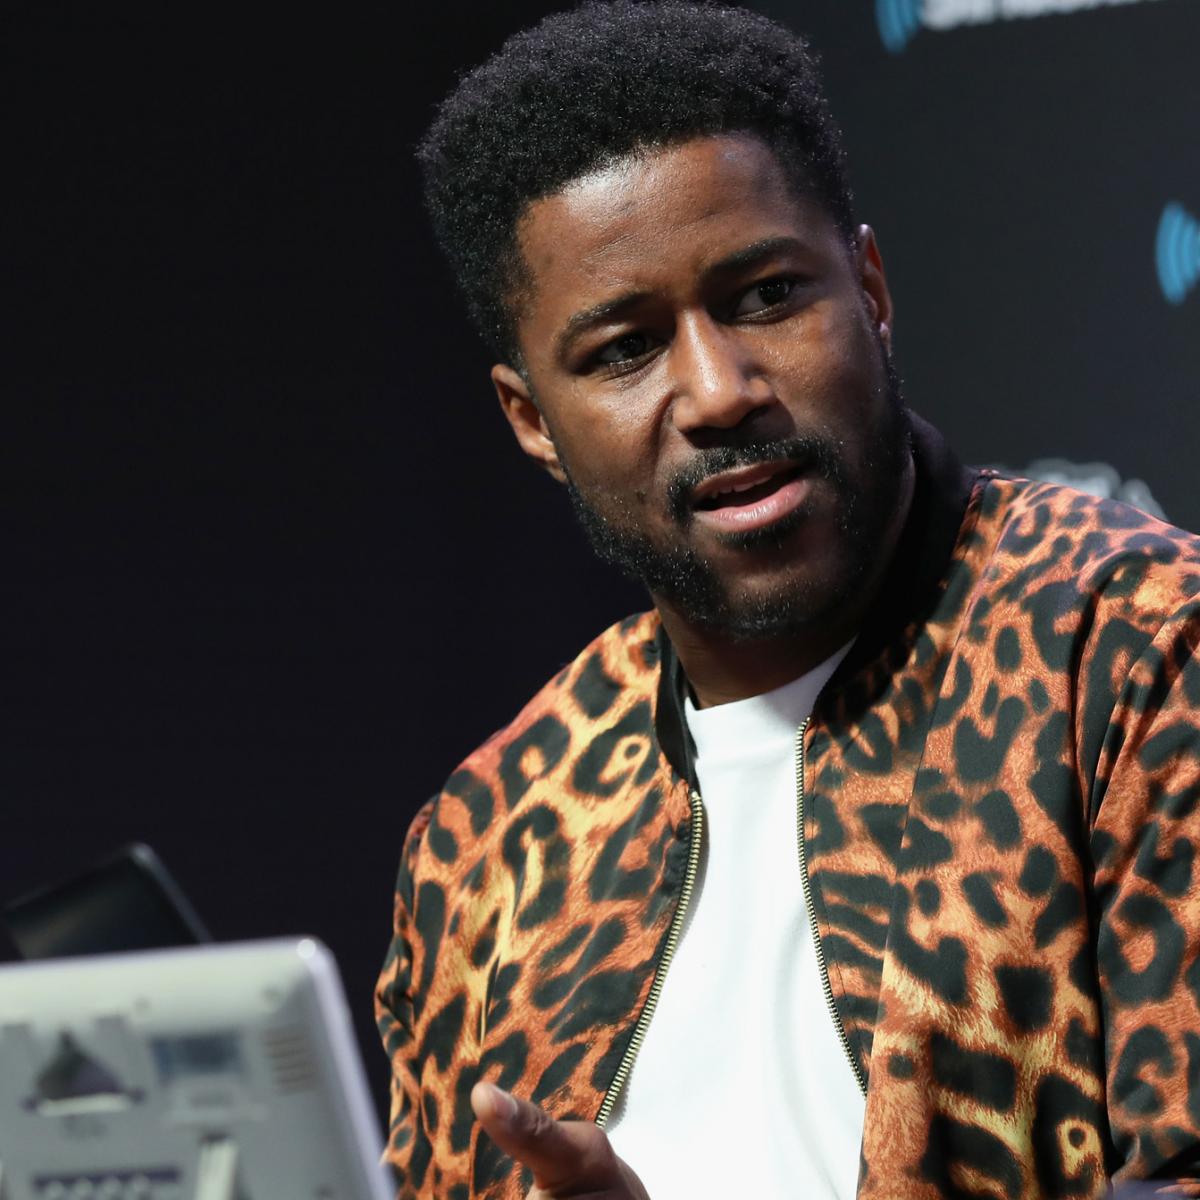 NFL Analyst Nate Burleson Joins Upcoming Show 'Extra Extra' as